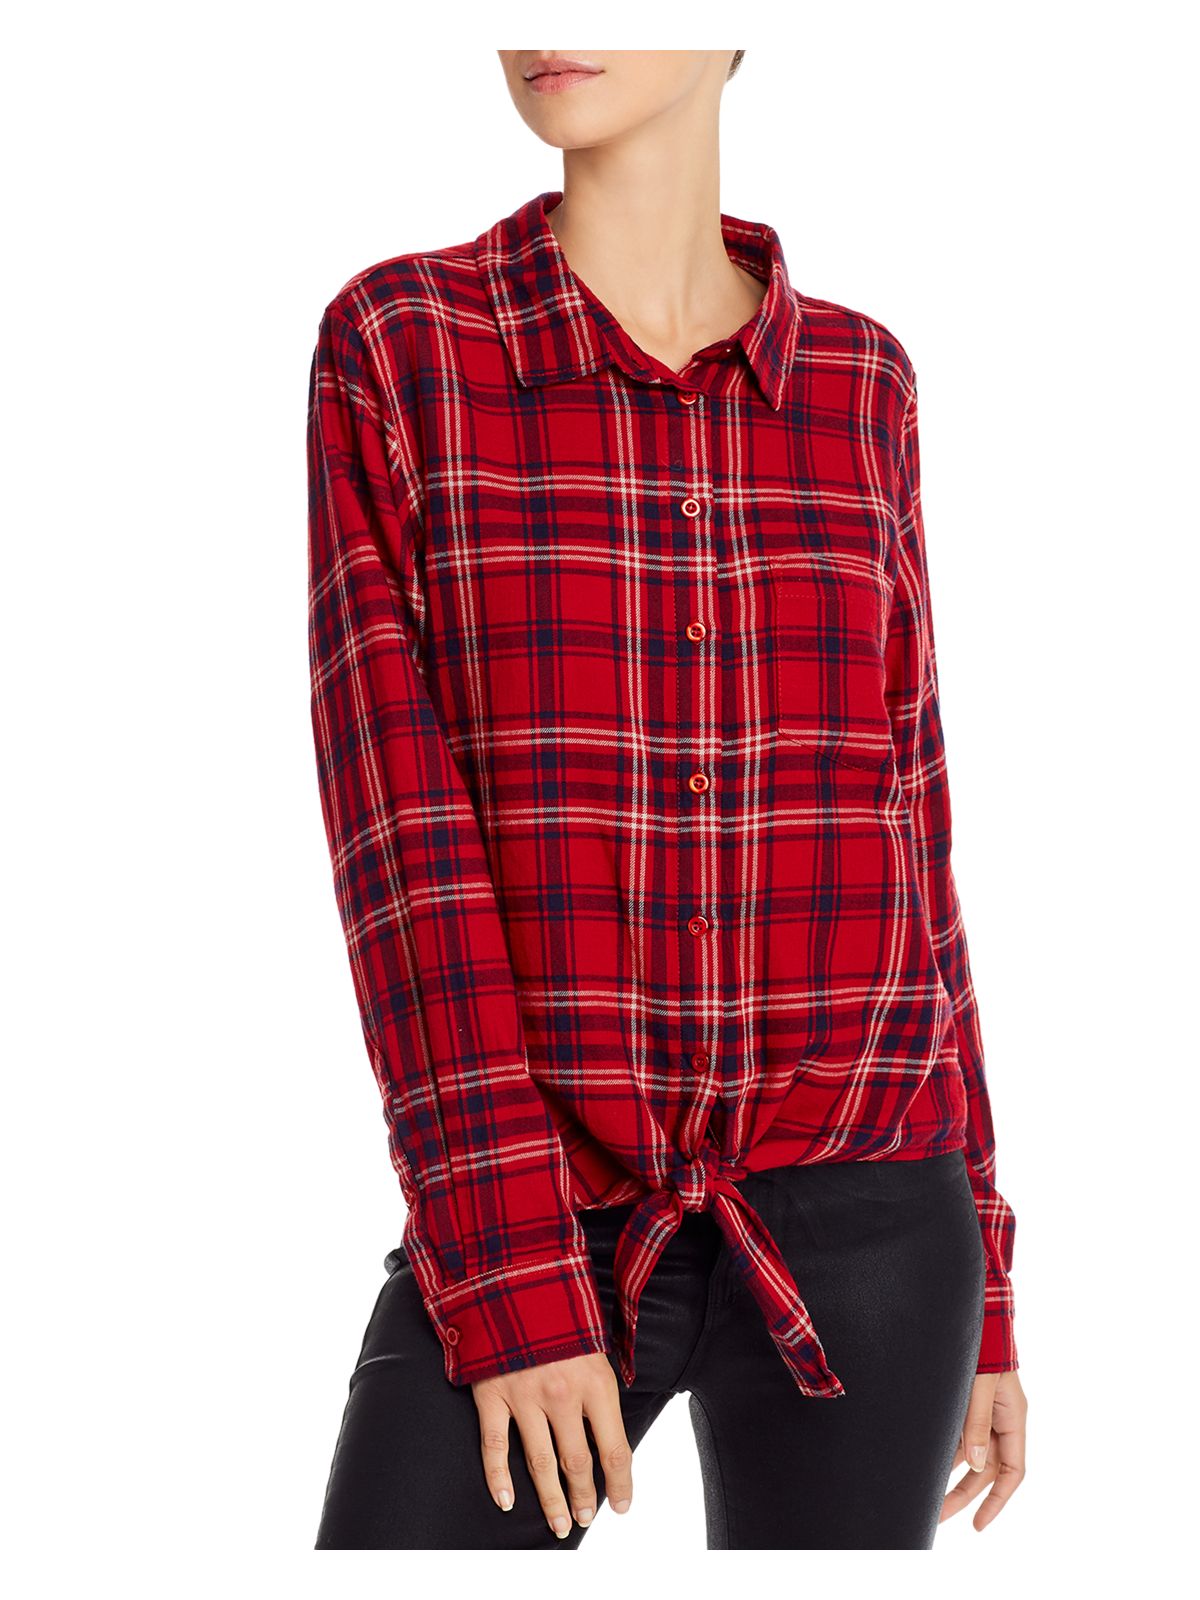 AQUA Womens Red Tie Plaid Long Sleeve Collared Button Up Top Size: S